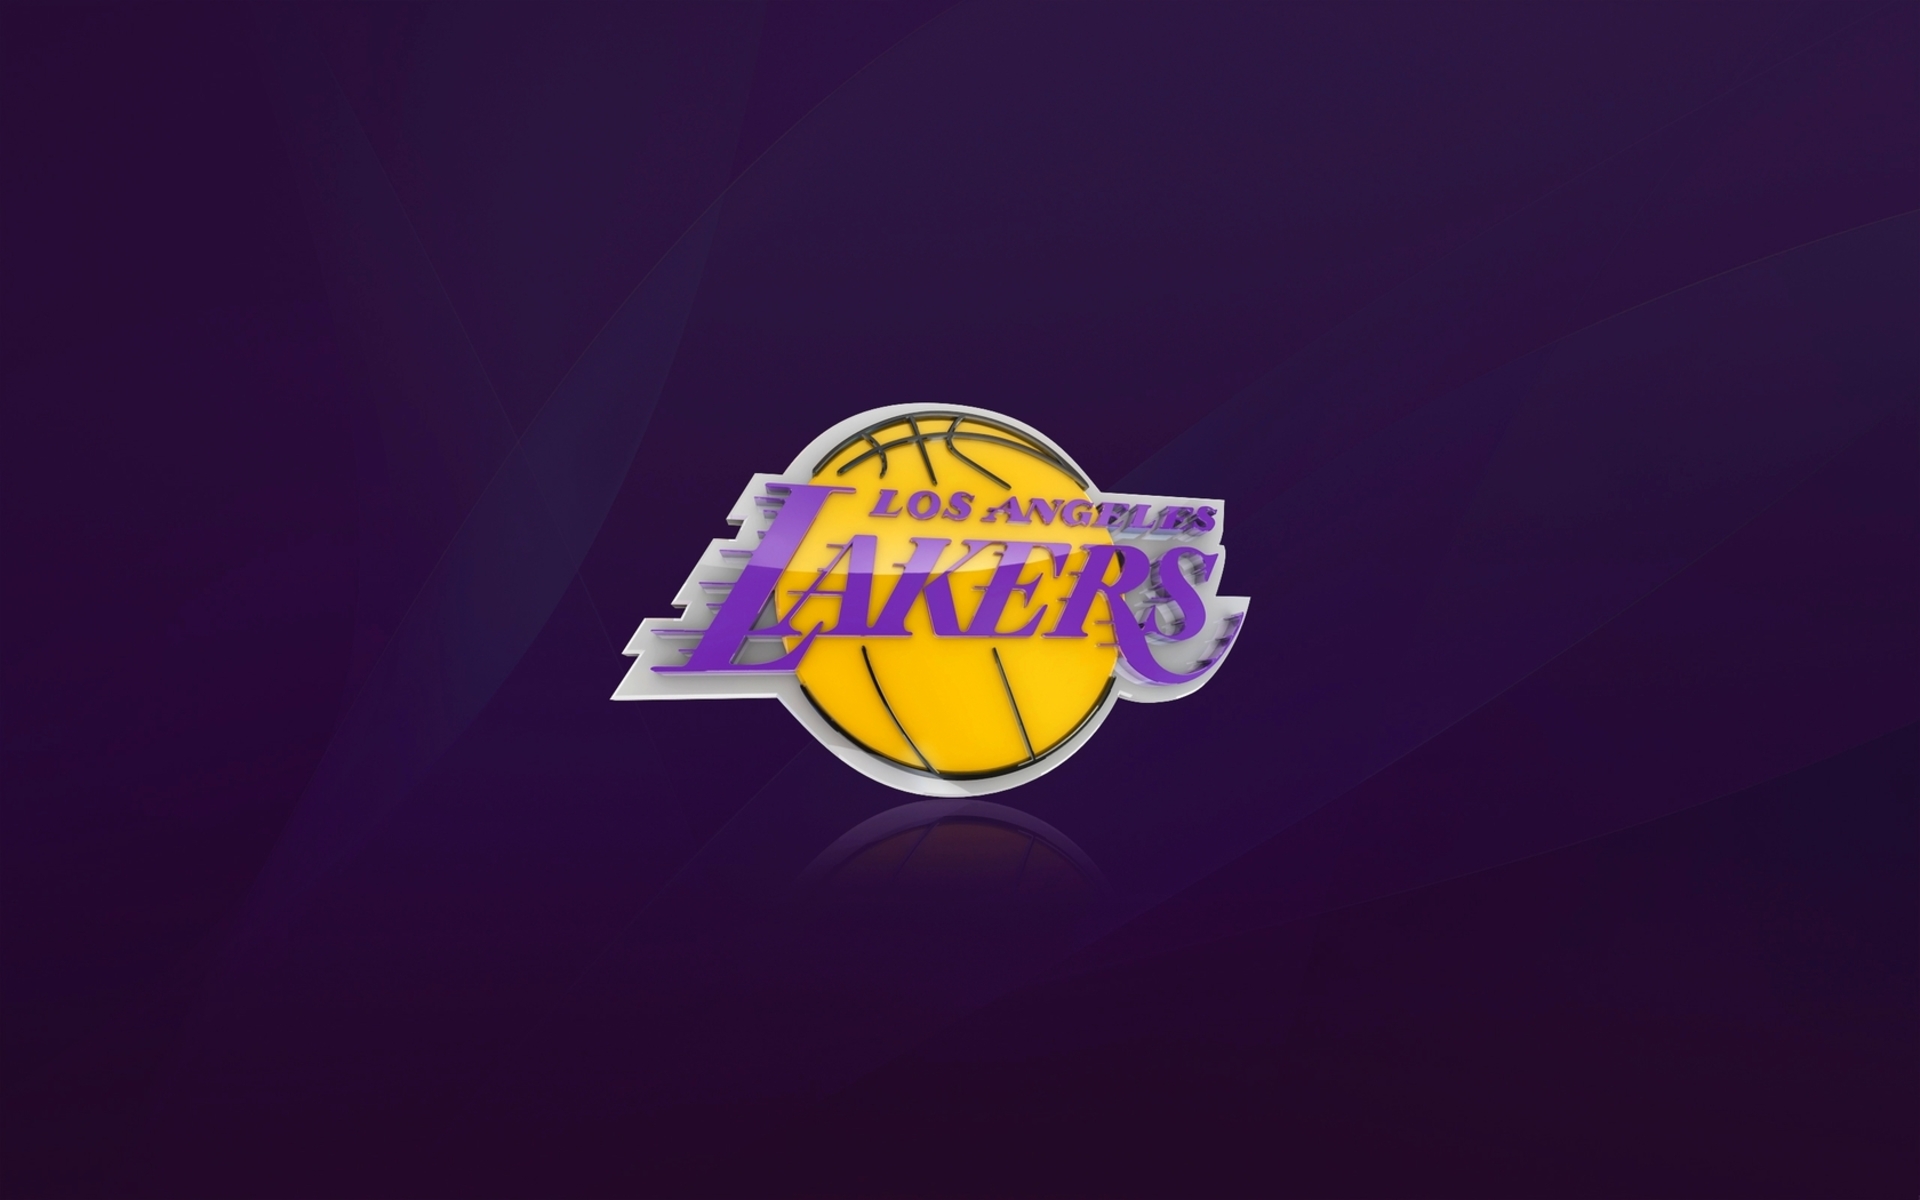 los angeles lakers, basketball, sports